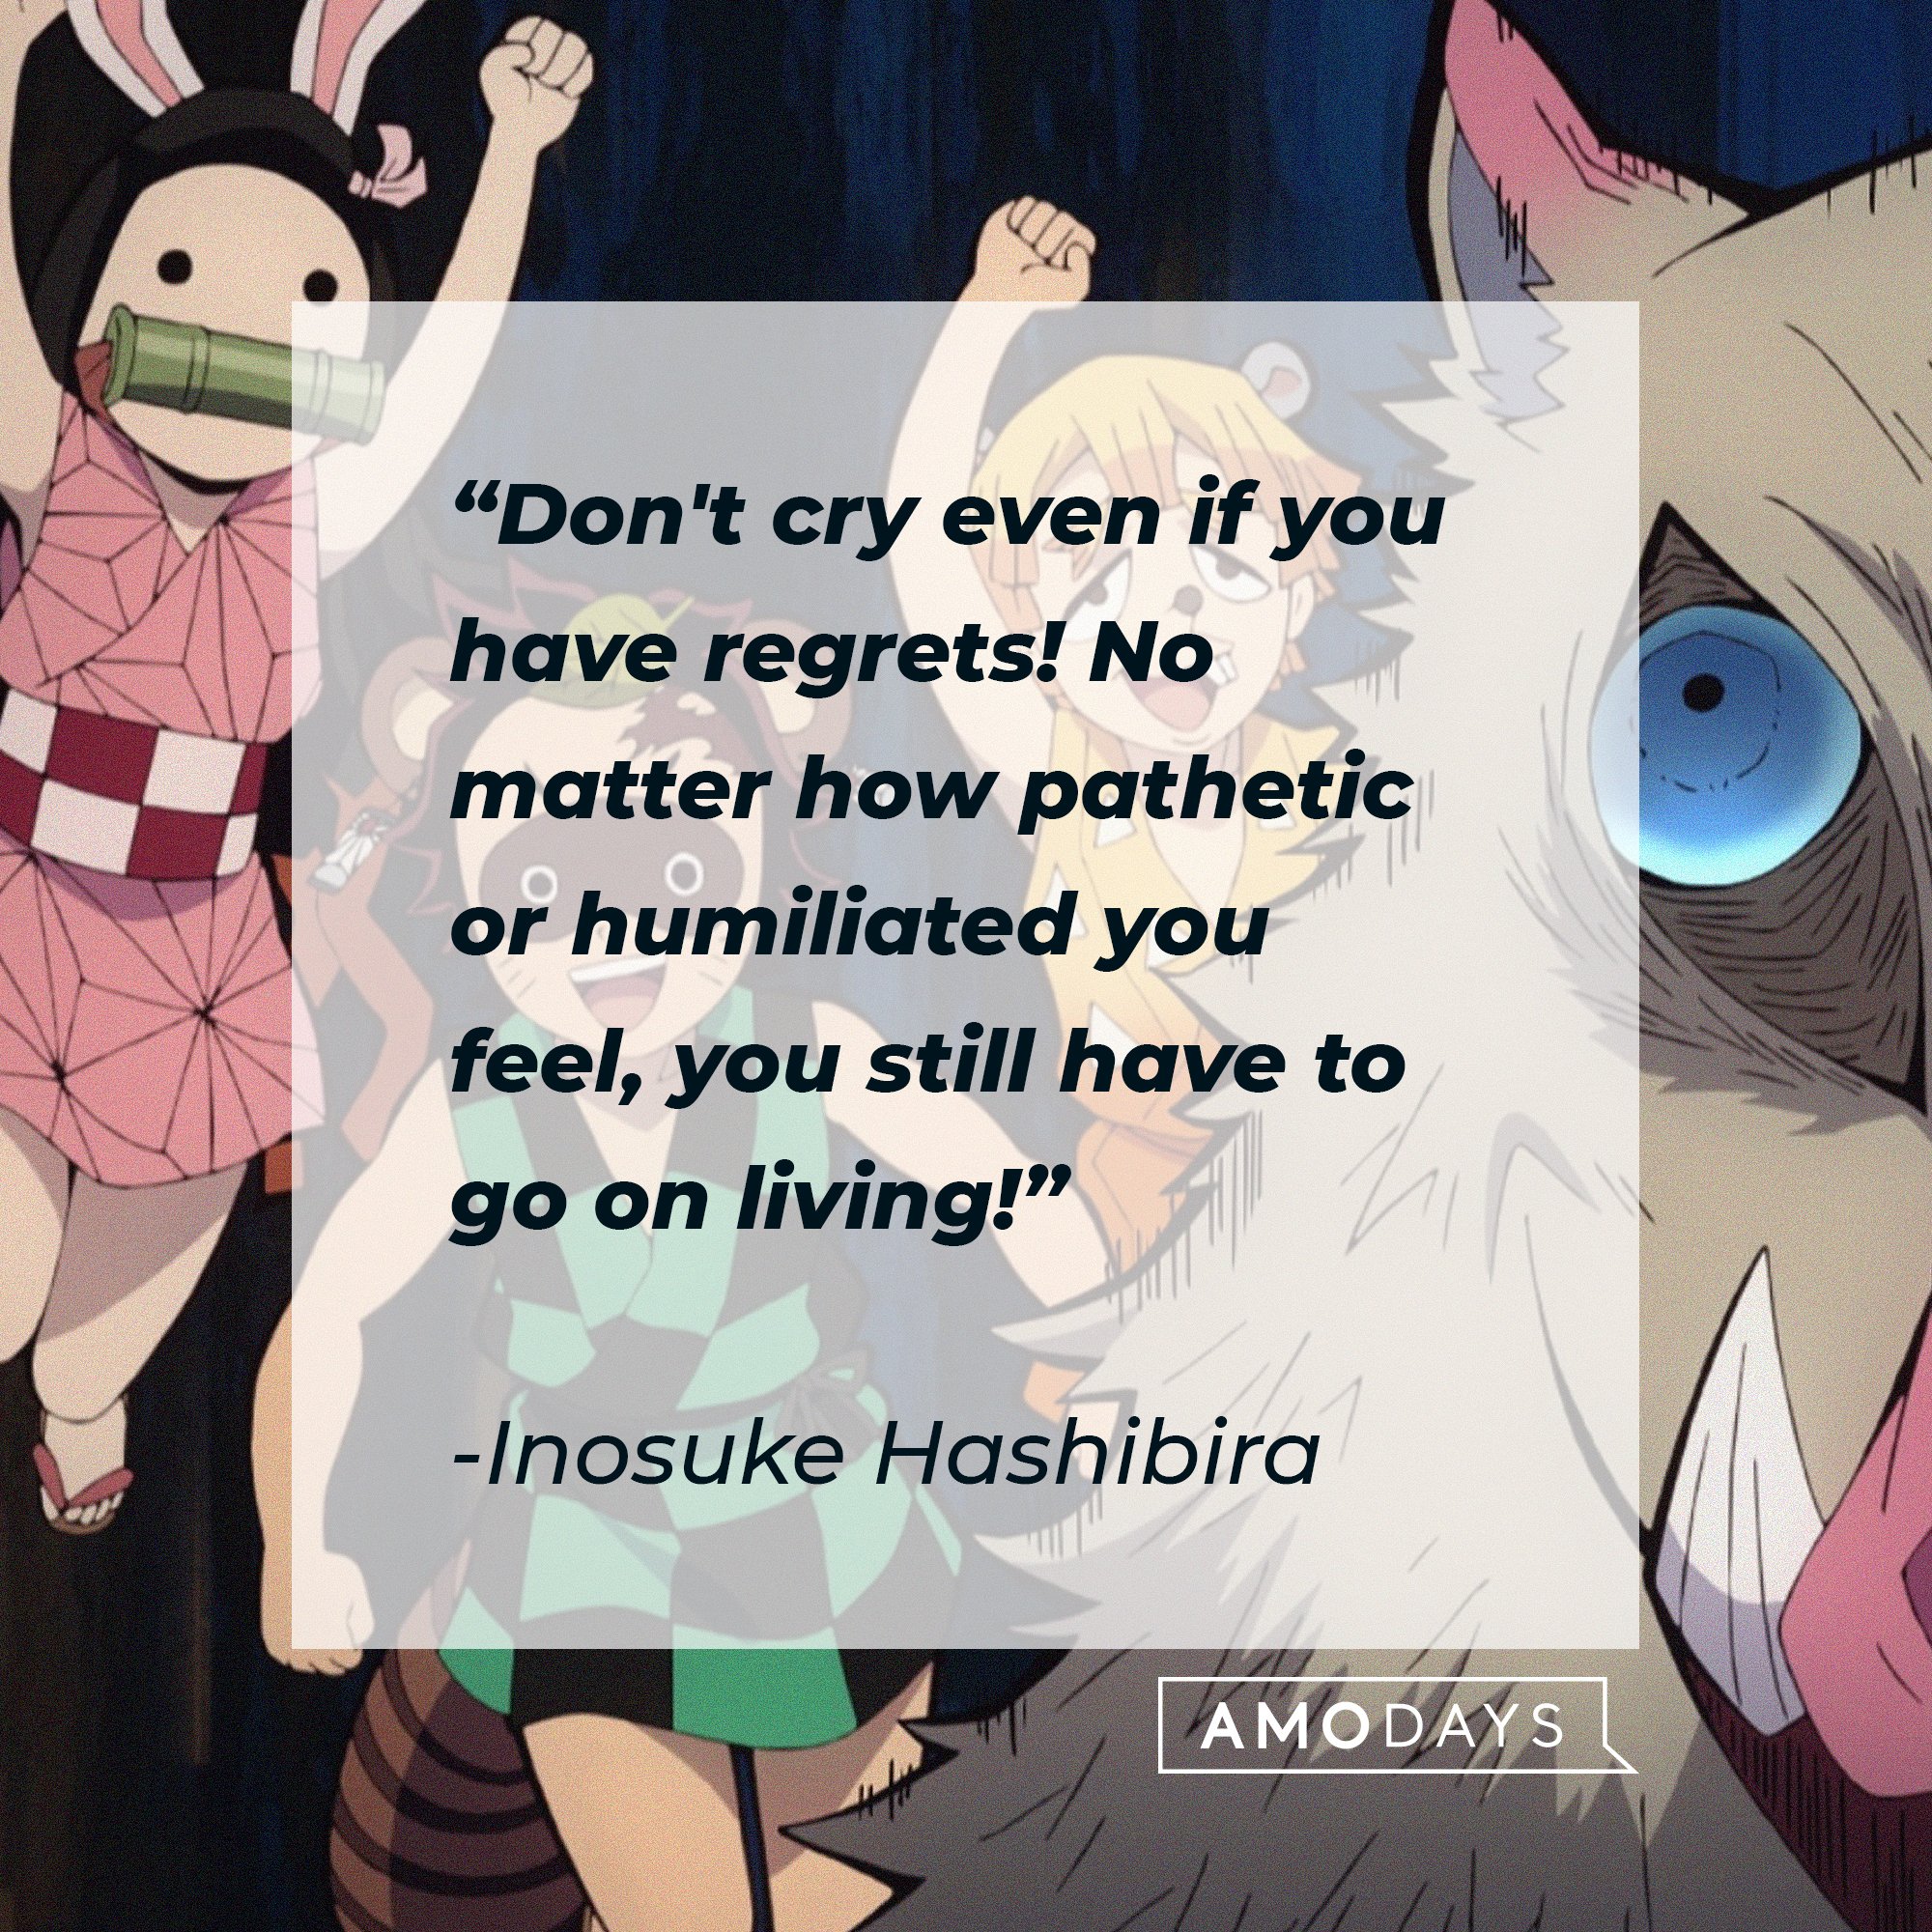  Inosuke Hashibira’s quote: "Don't cry even if you have regrets! No matter how pathetic or humiliated you feel, you still have to go on living!" | Image: AmoDays